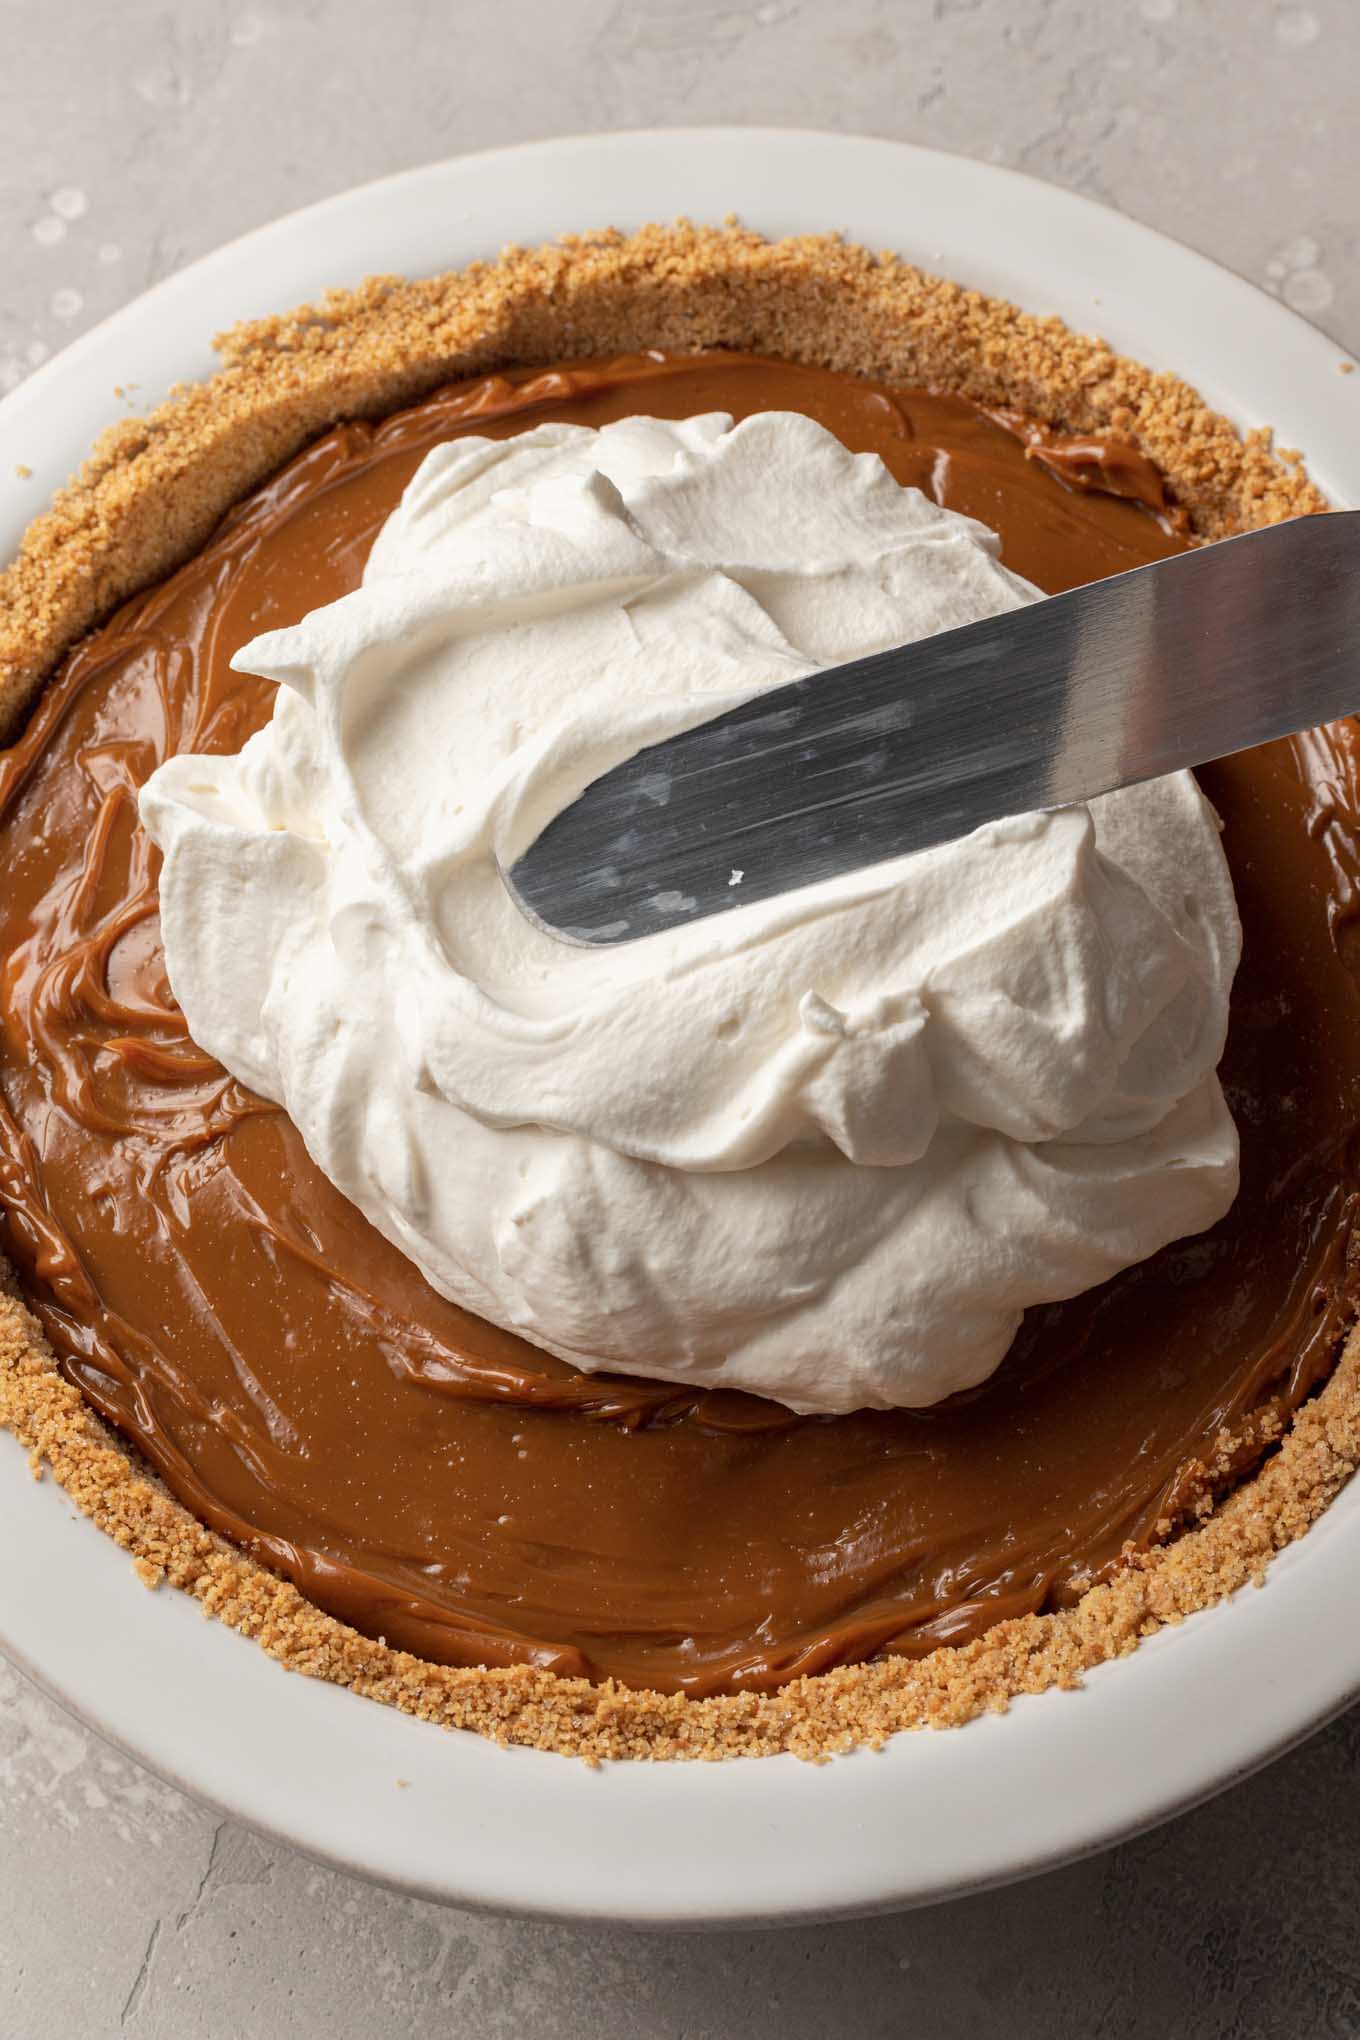 Whipped cream being spread over dulce de leche in a pie dish.